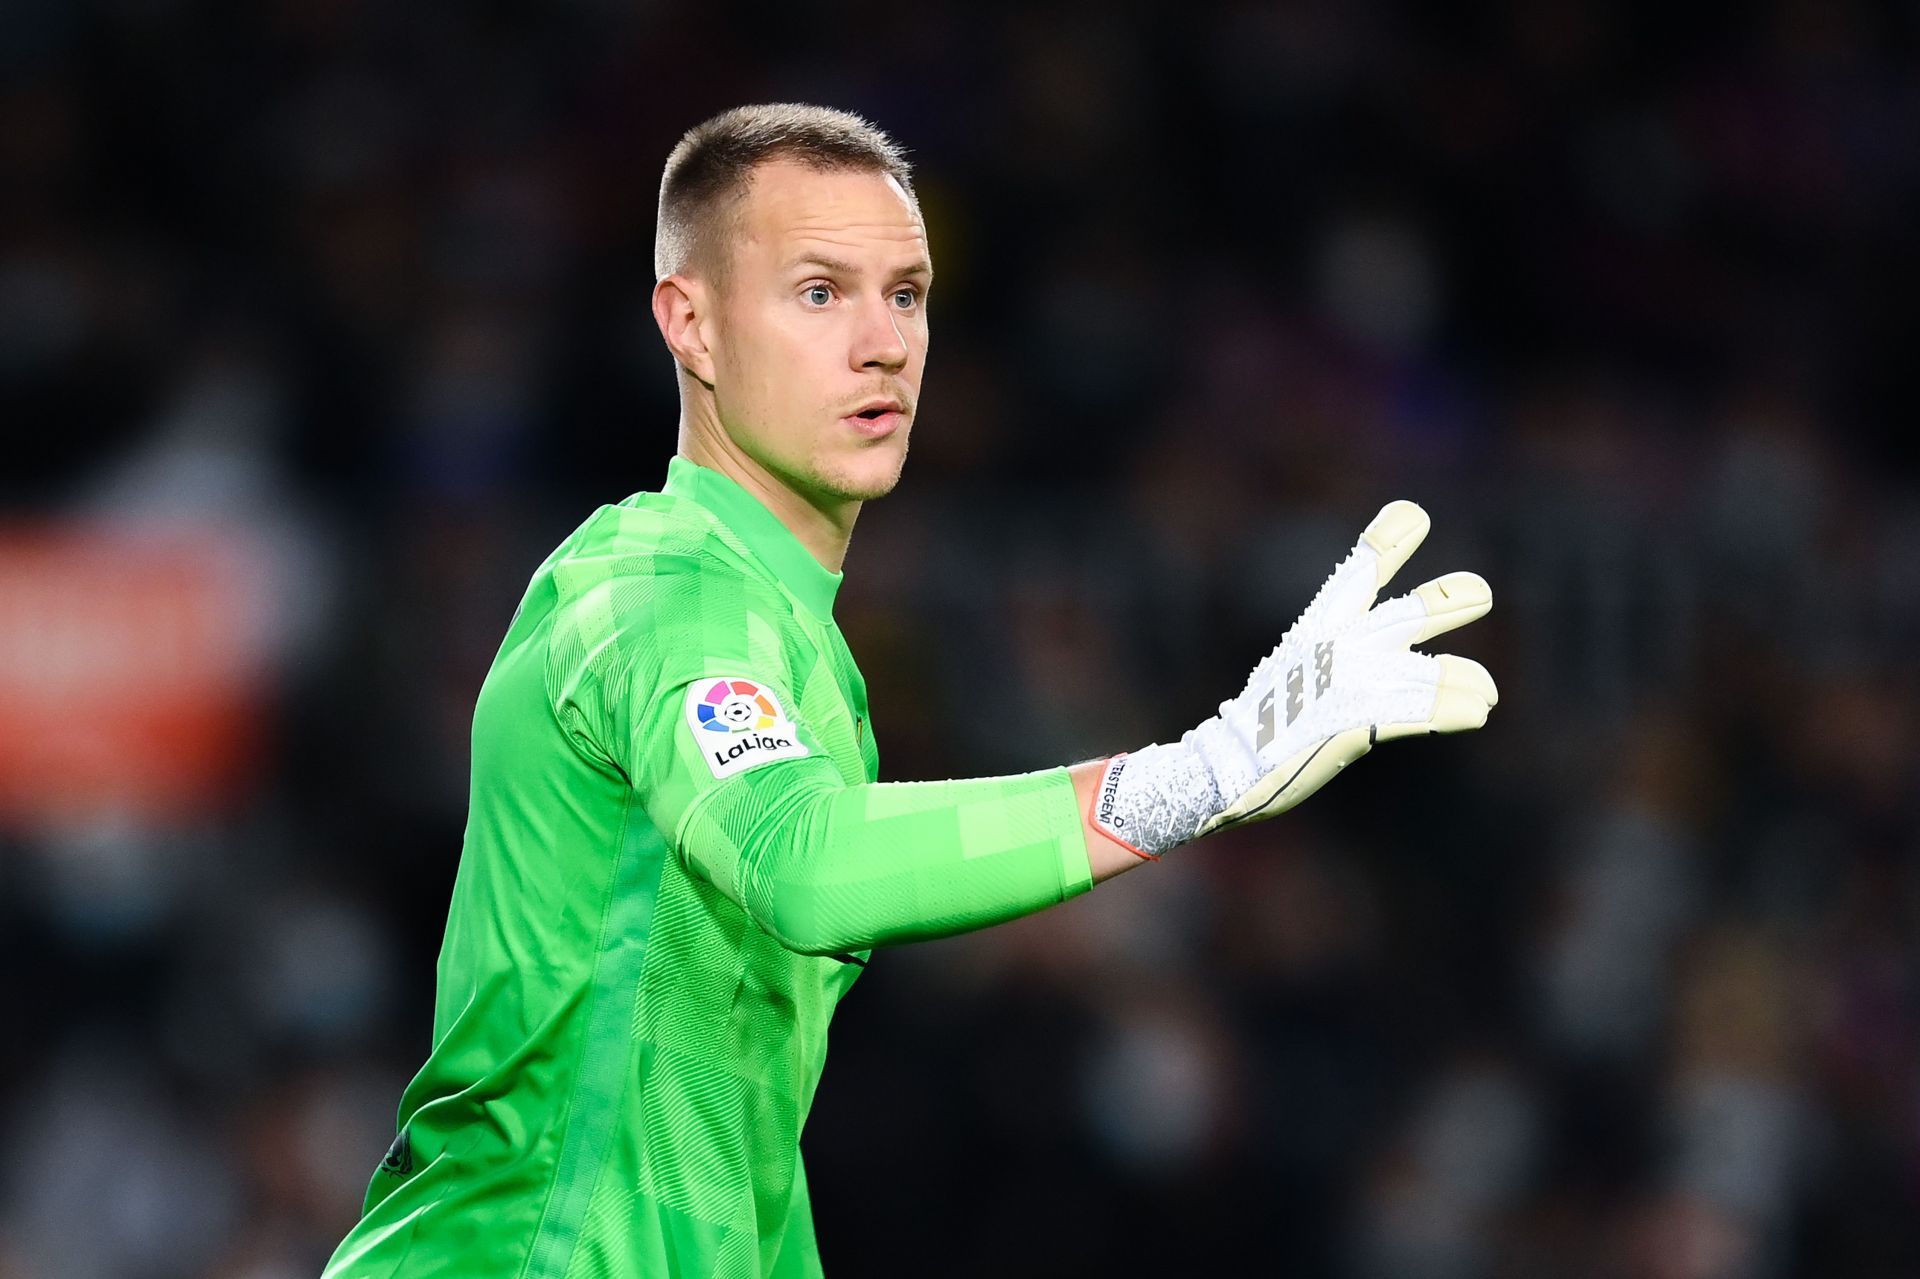 Marc-Andre ter Stegen has made 16 appearances for Barcelona this season